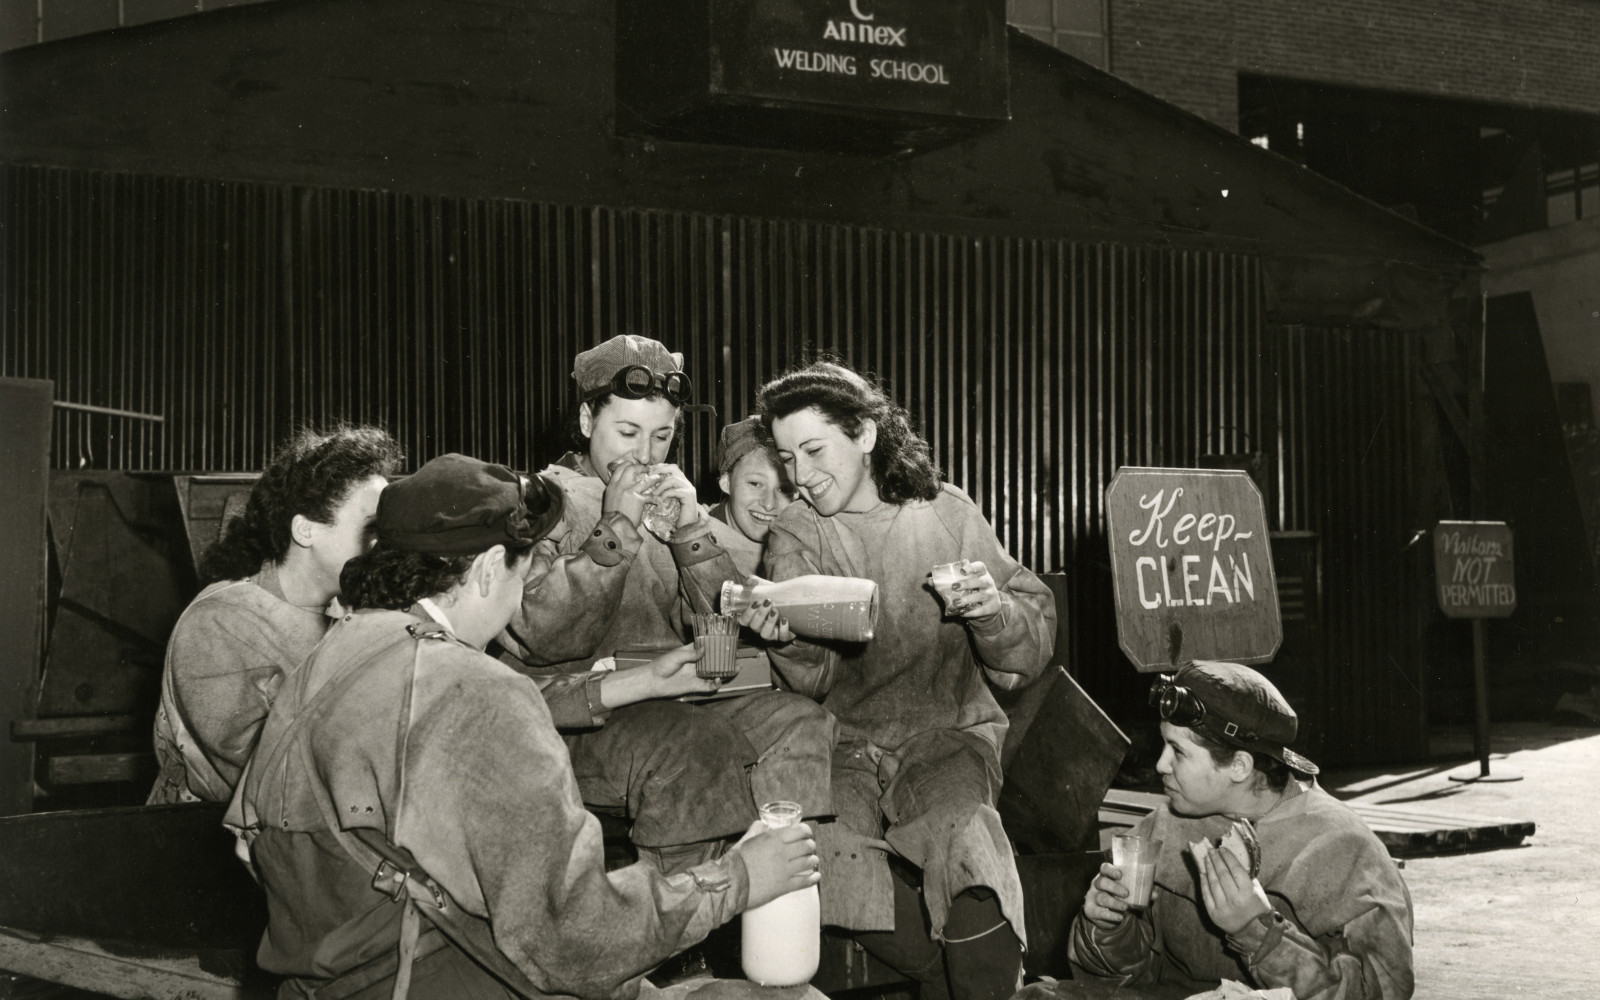 Female workers on lunch break AT BNY 1945 NYHS